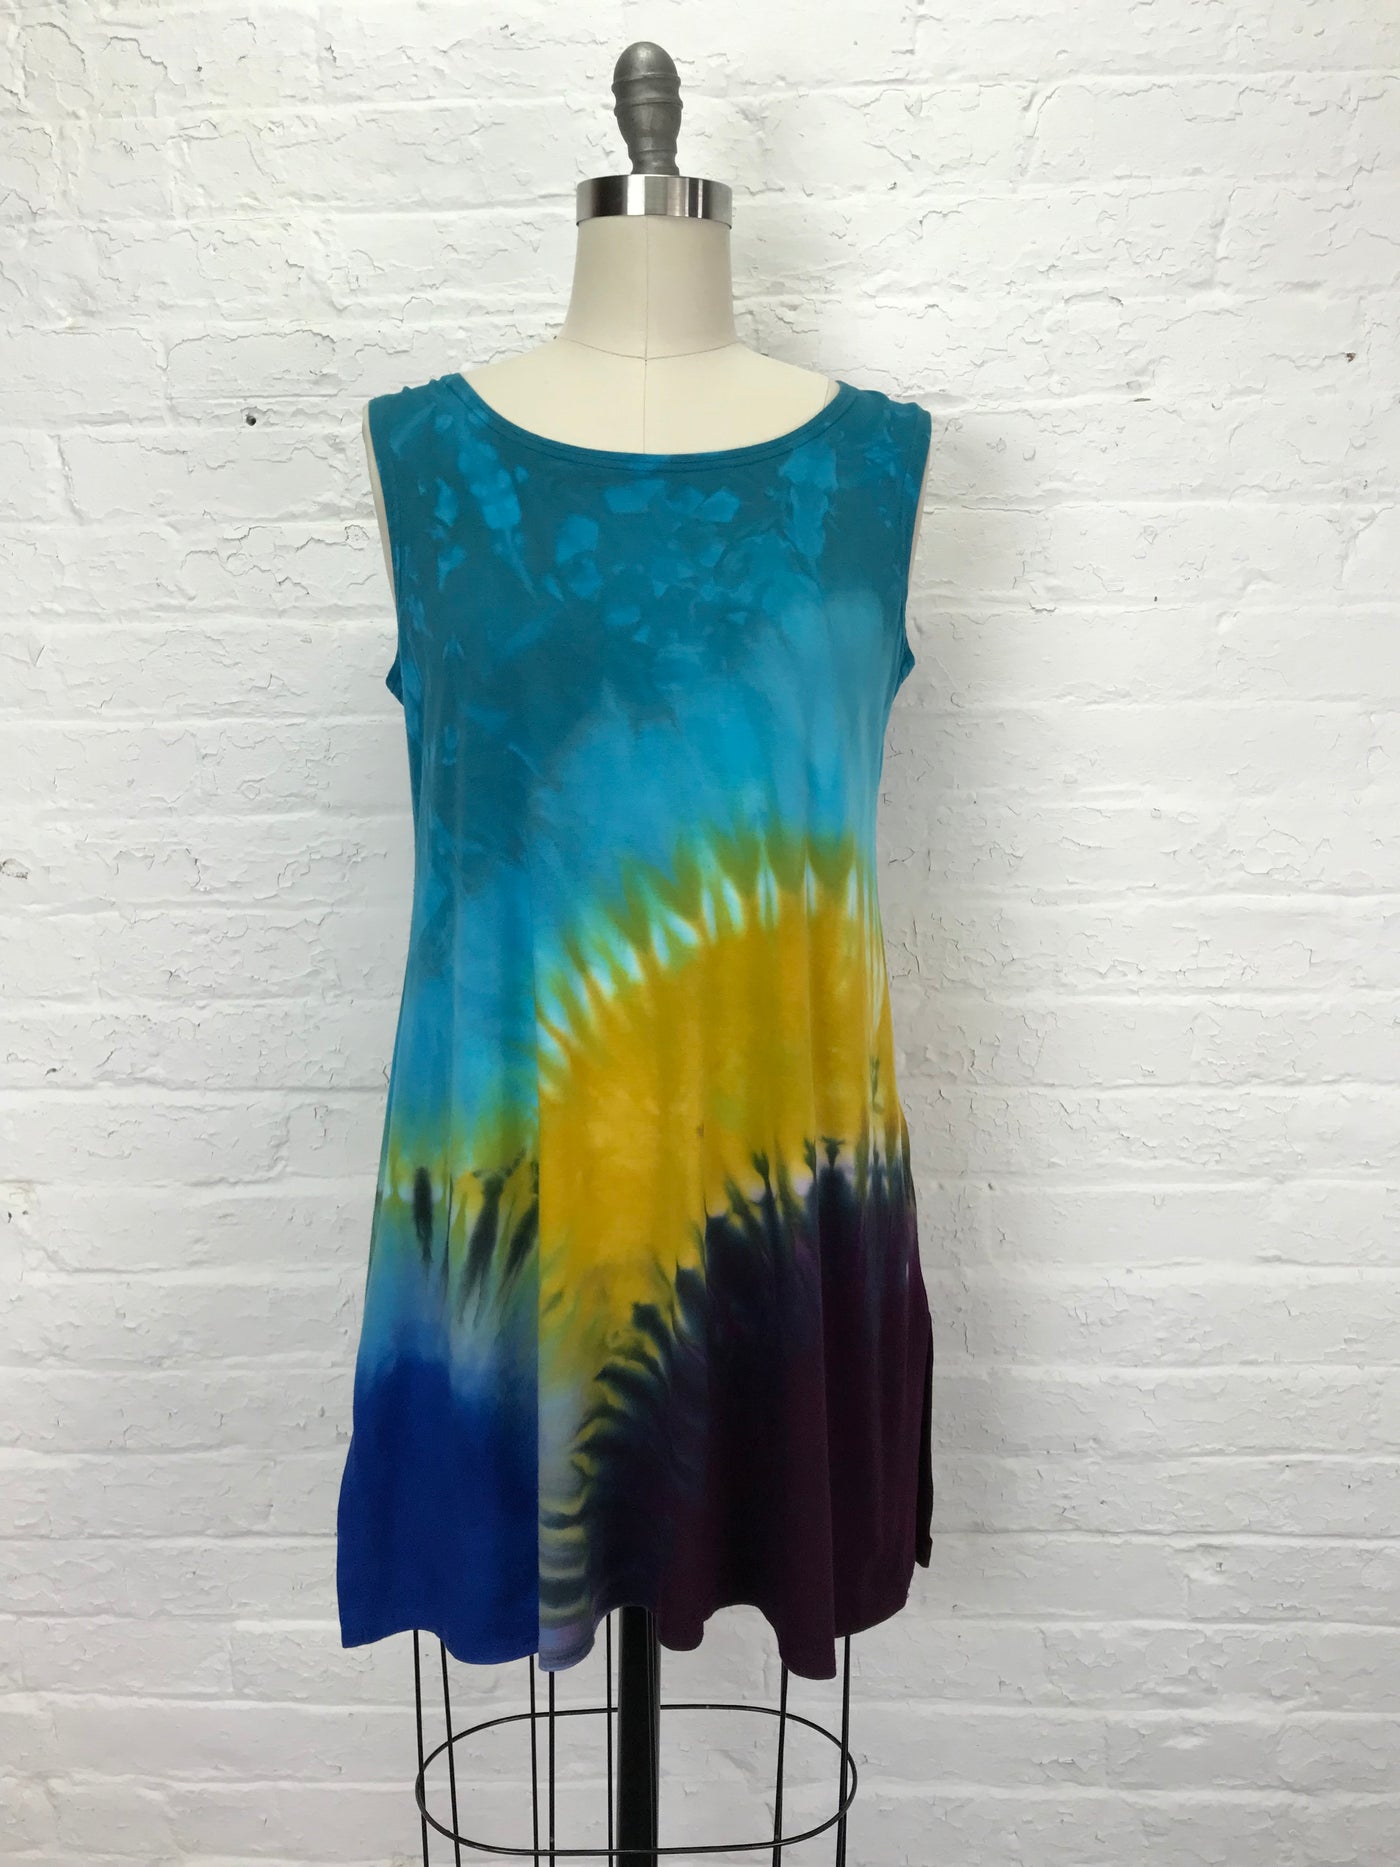 Eileen Mini Tank Tunic in Sunrise Over Colorful Clouds - Small